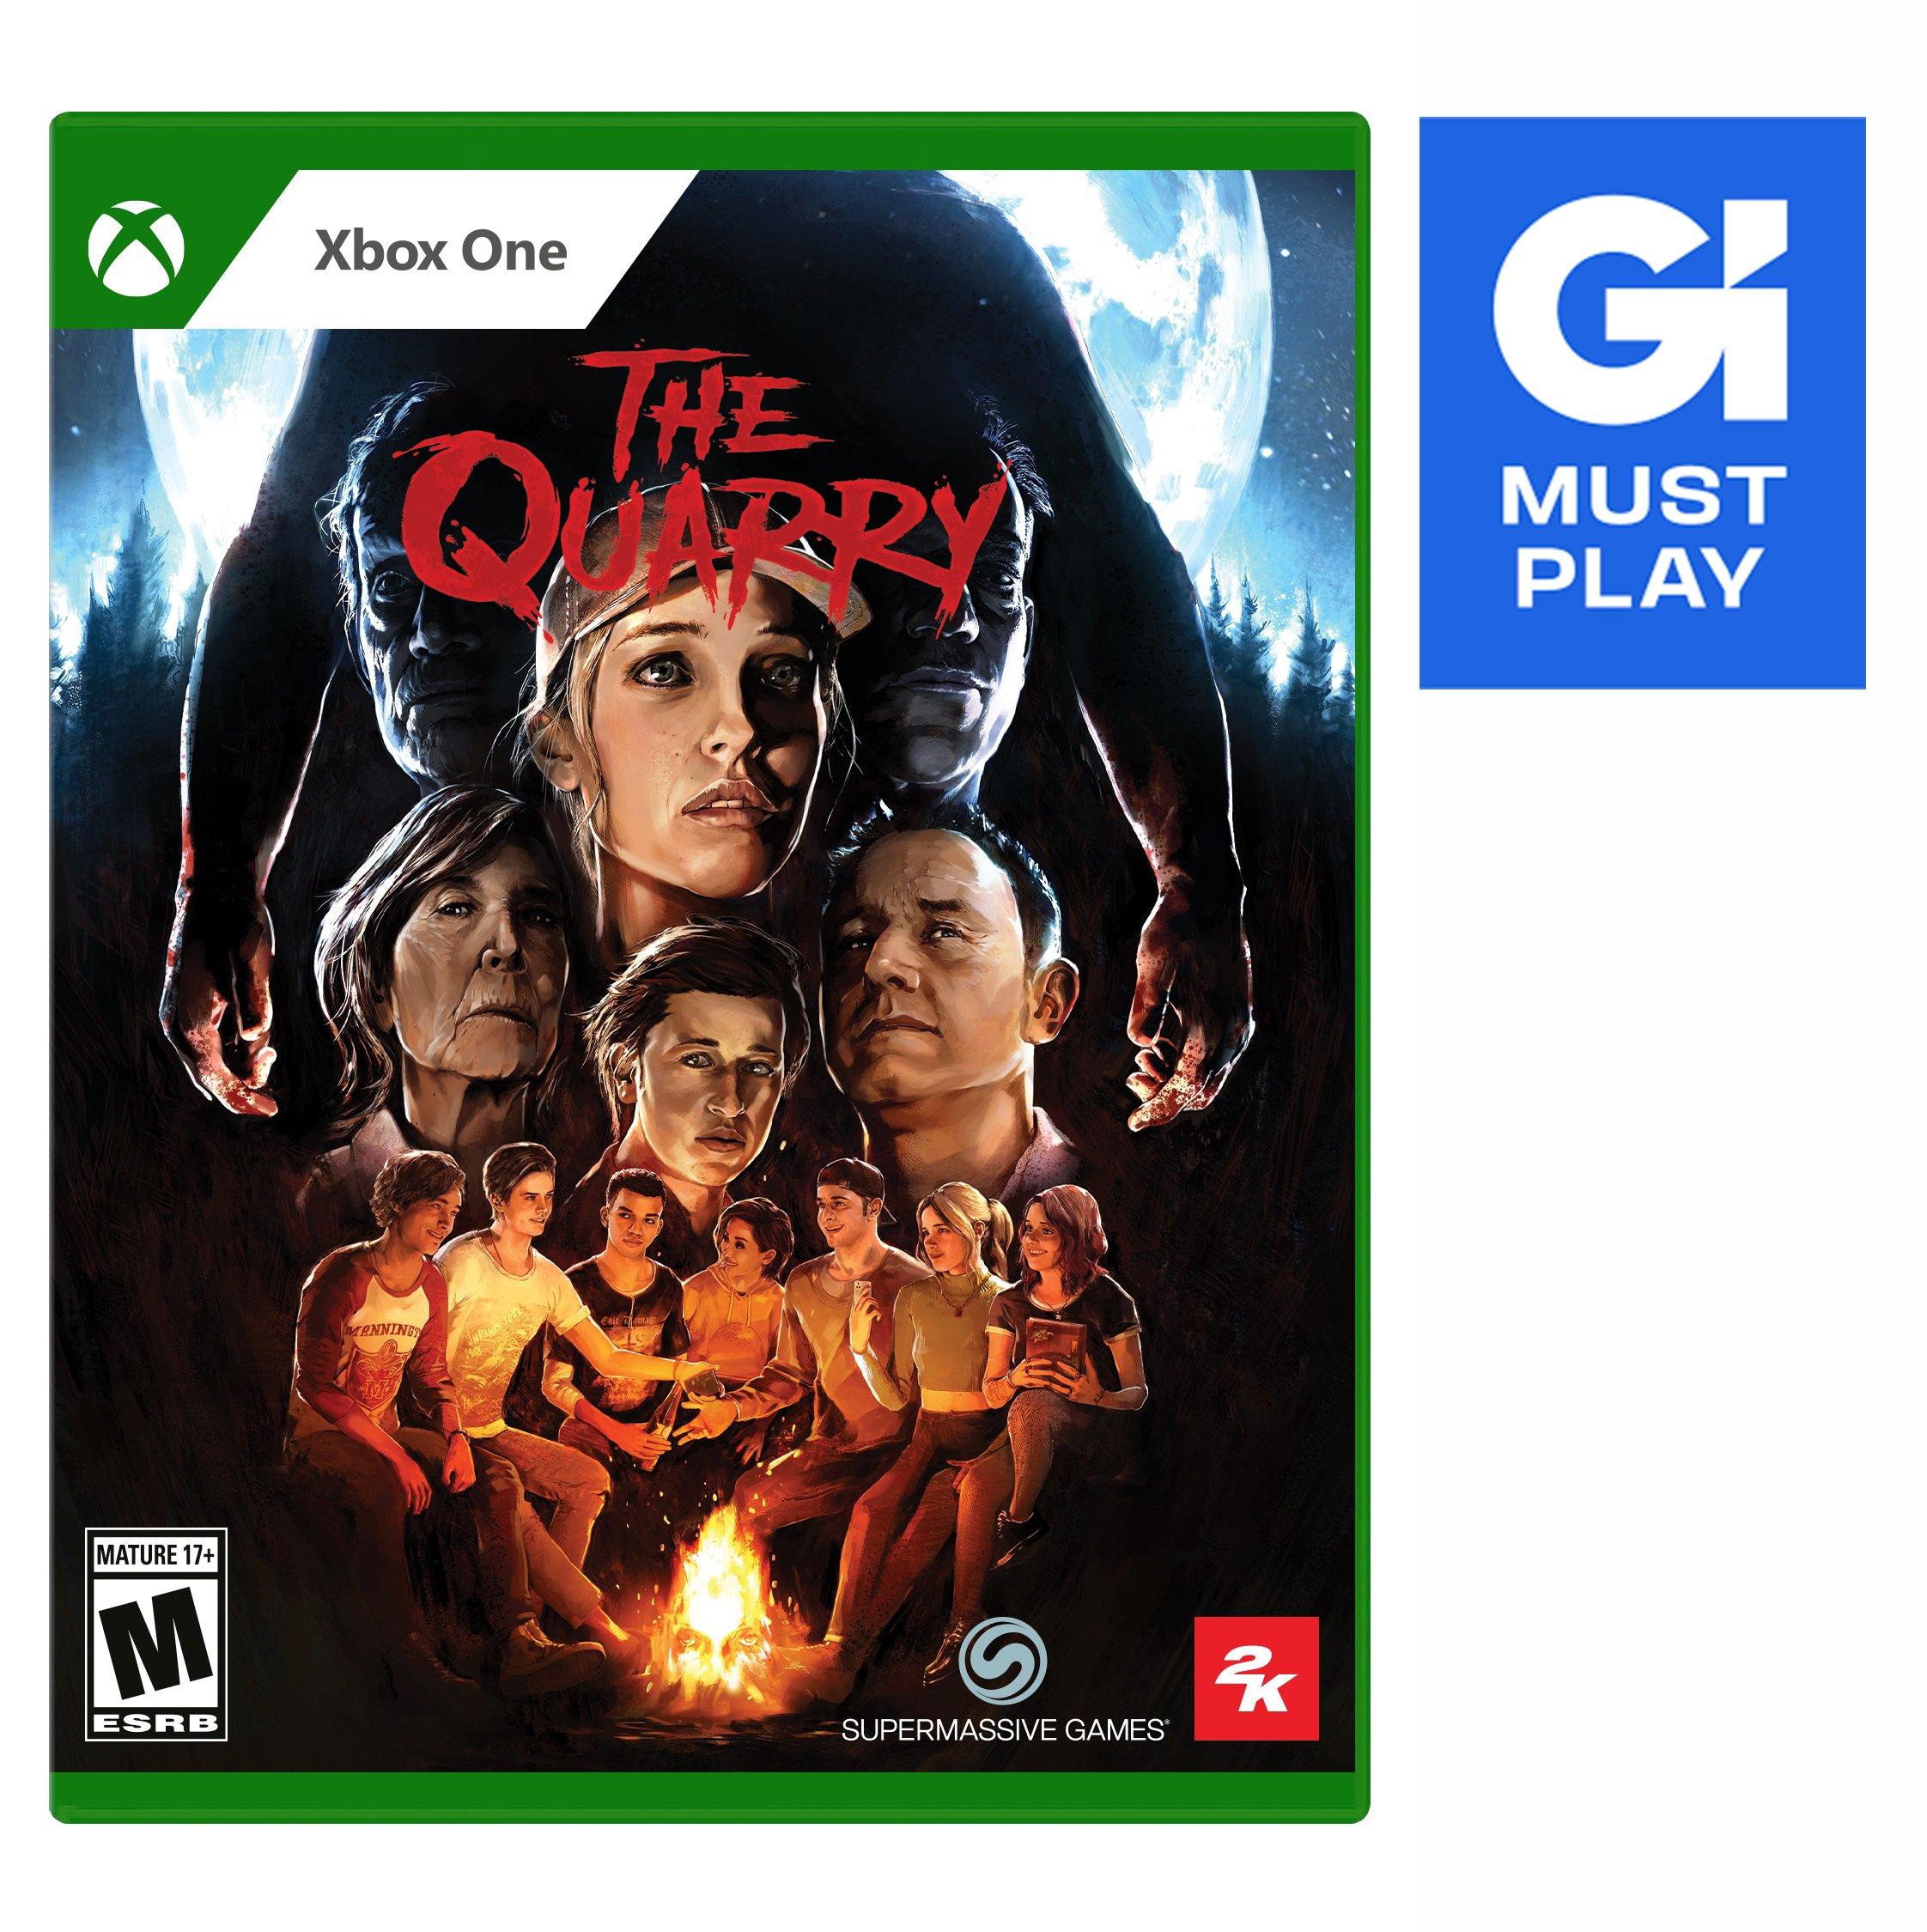 The Quarry - Xbox One (2K Games), Pre-Owned - GameStop